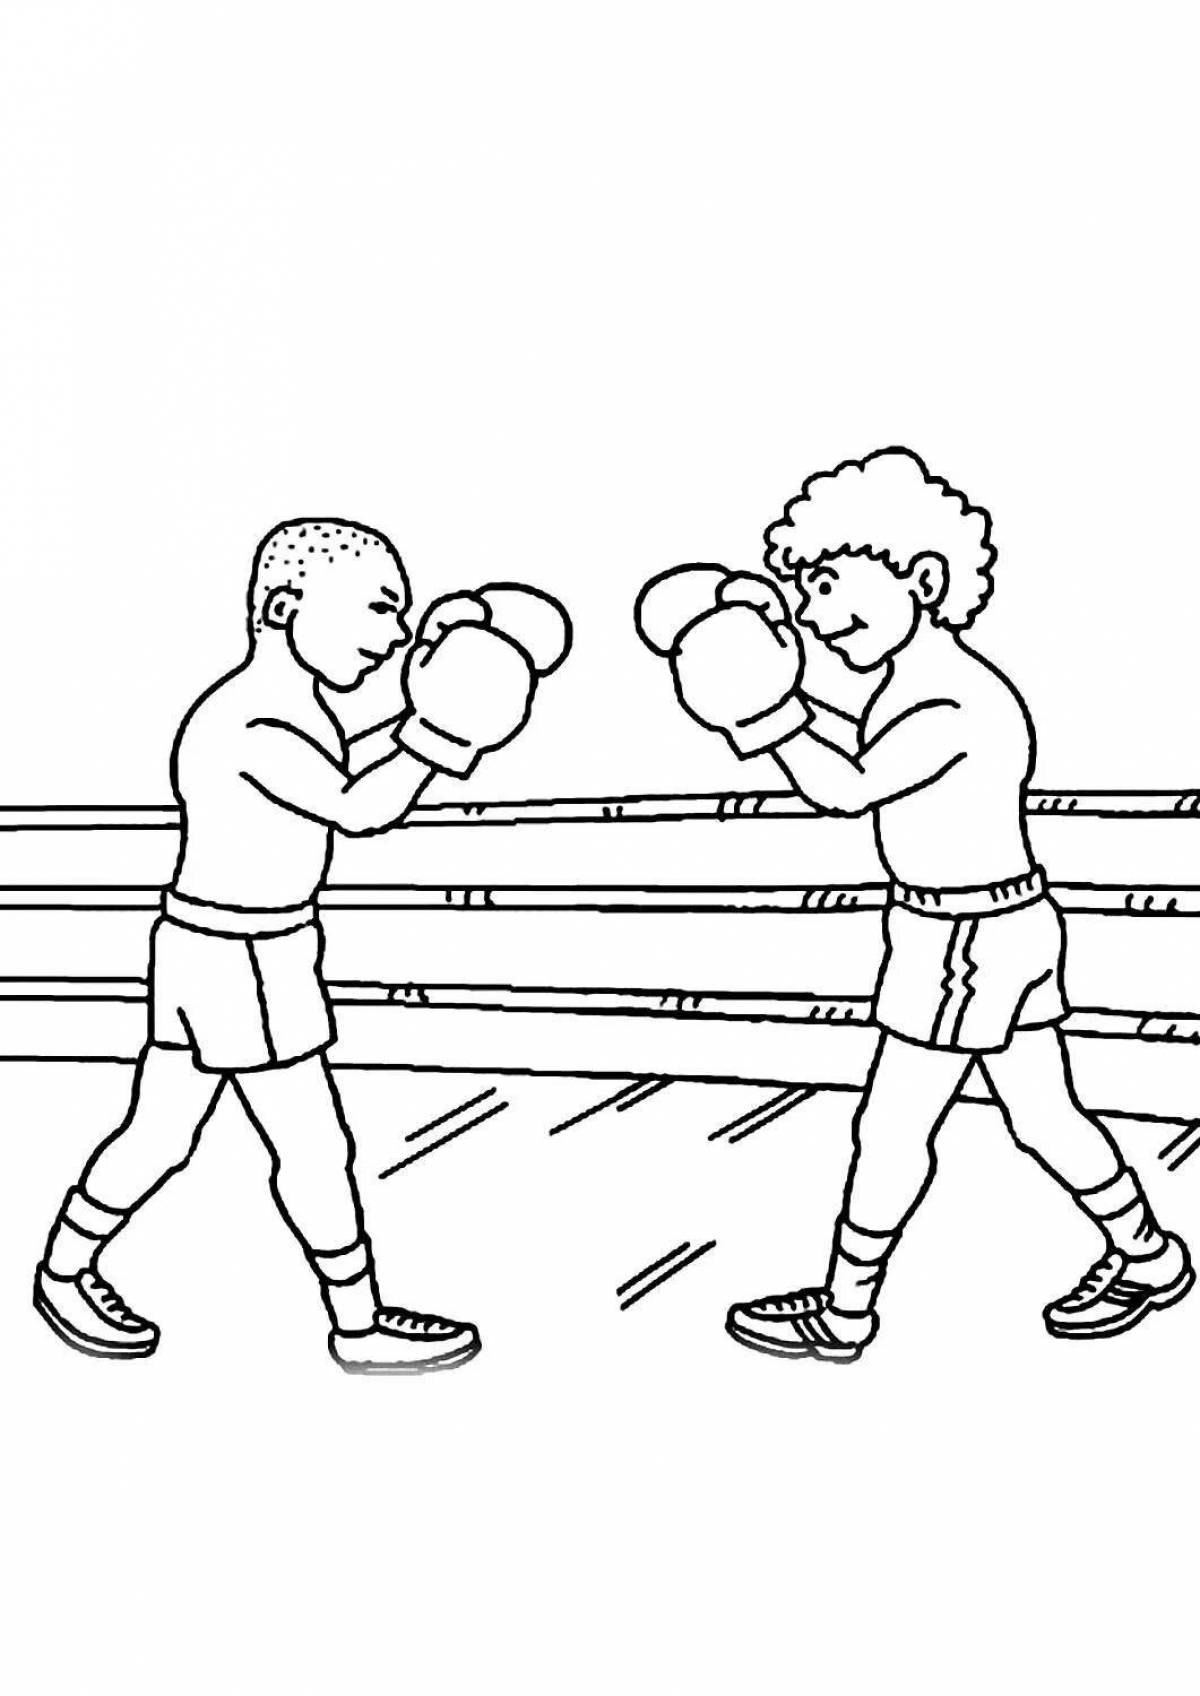 Shiny boxing and boo coloring for kids